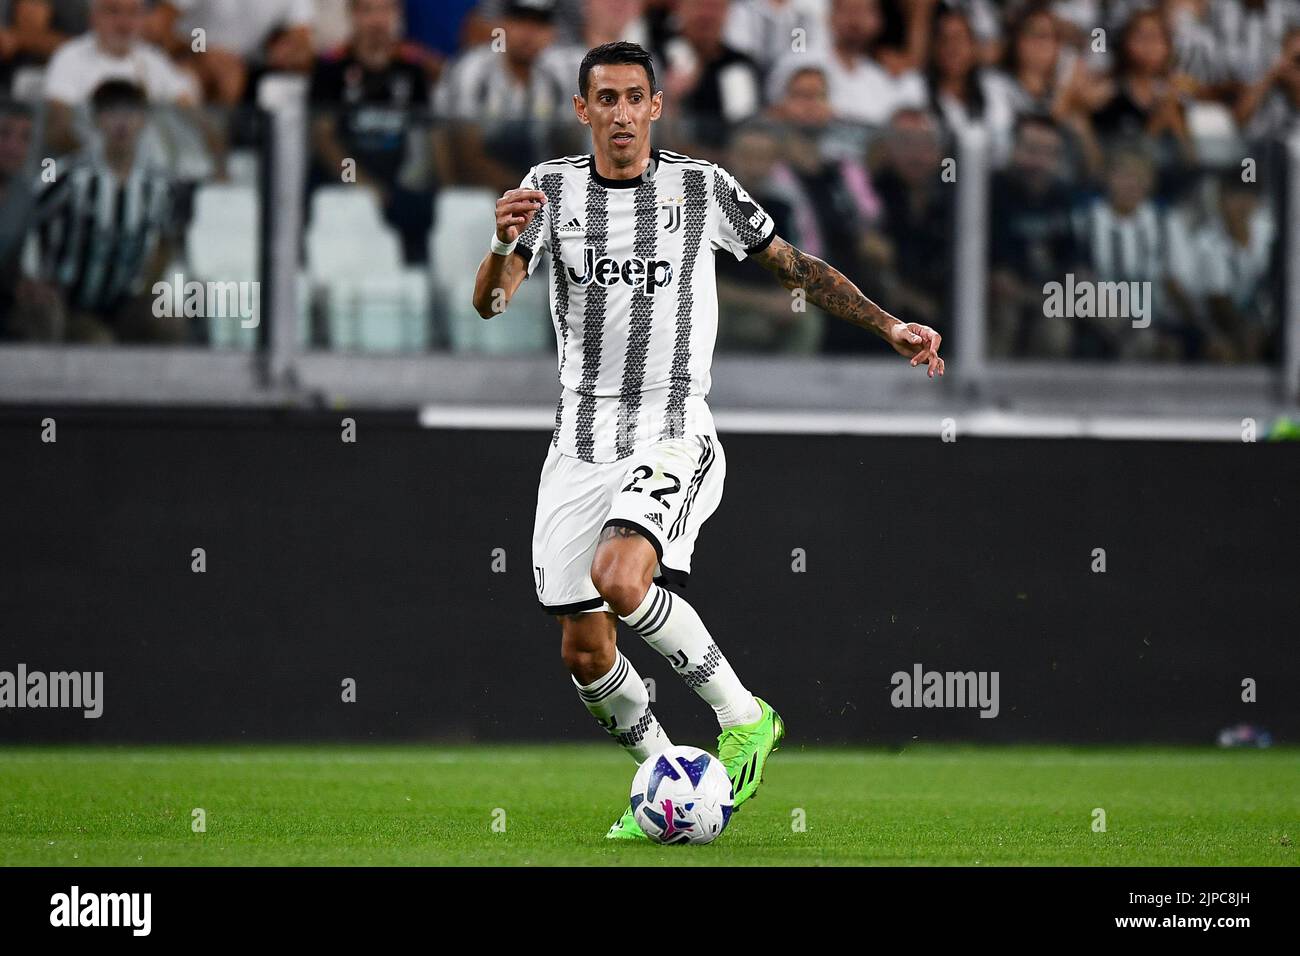 Turin, Italy. 15 August 2022. Angel Di Maria of Juventus FC in action during the Serie A football match between Juventus FC and US Sassuolo. Credit: Nicolò Campo/Alamy Live News Stock Photo